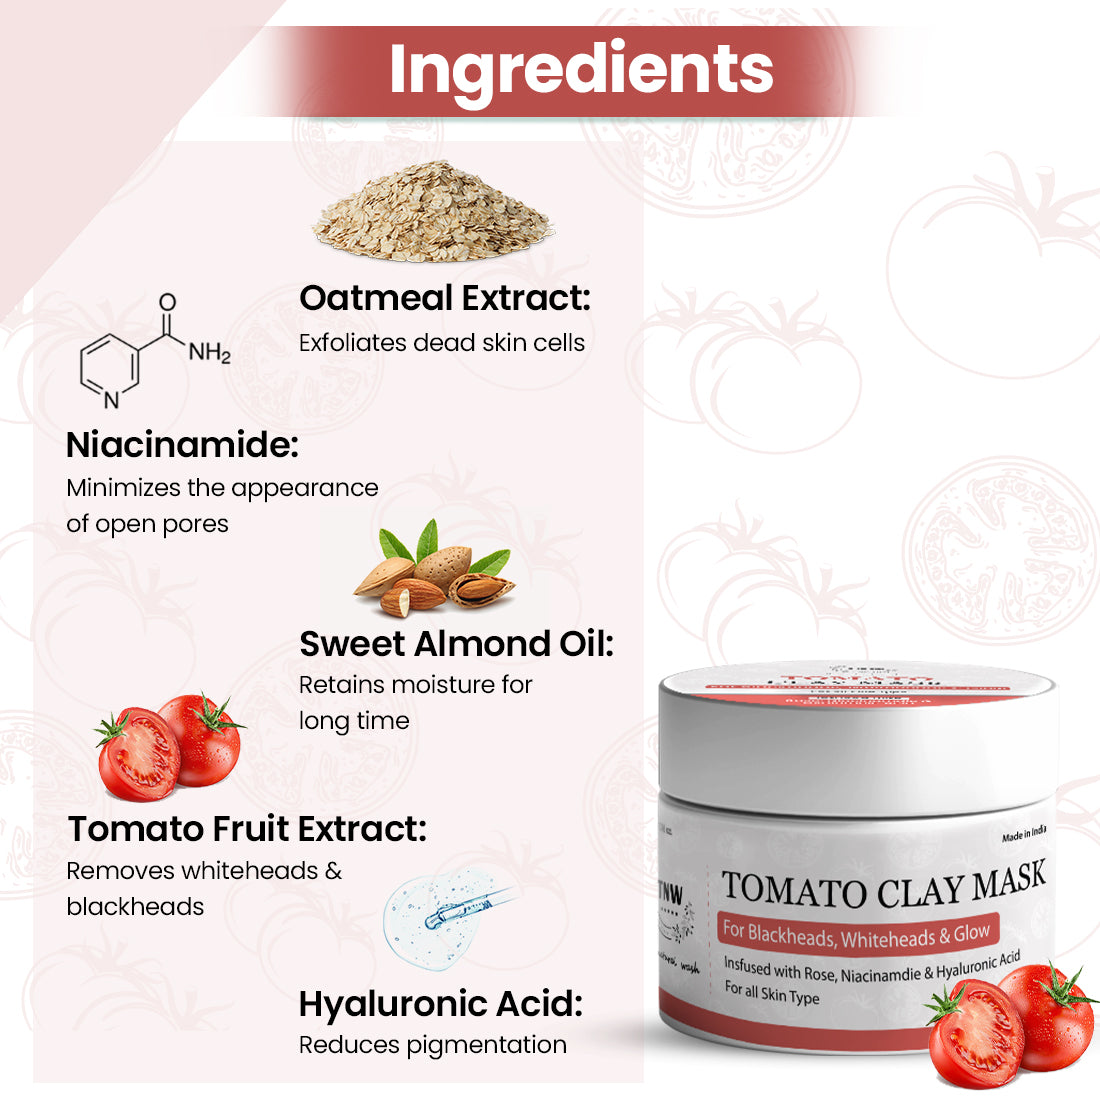 Tomato Clay Mask Ingredients